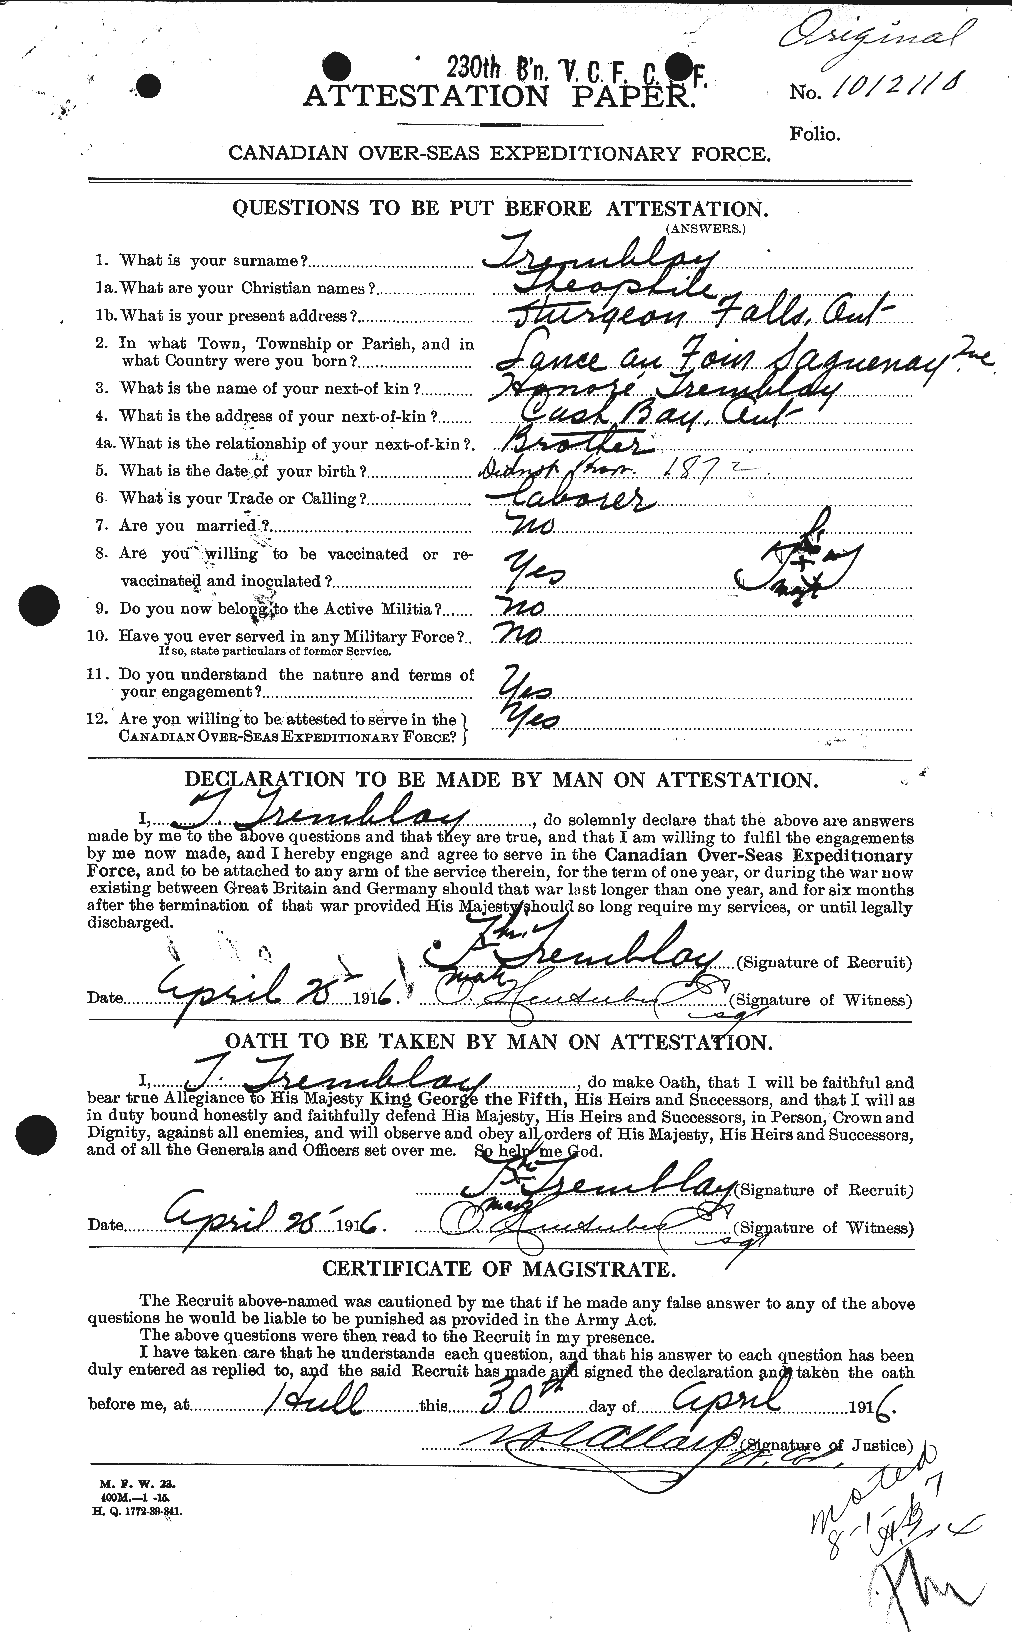 Personnel Records of the First World War - CEF 638316a